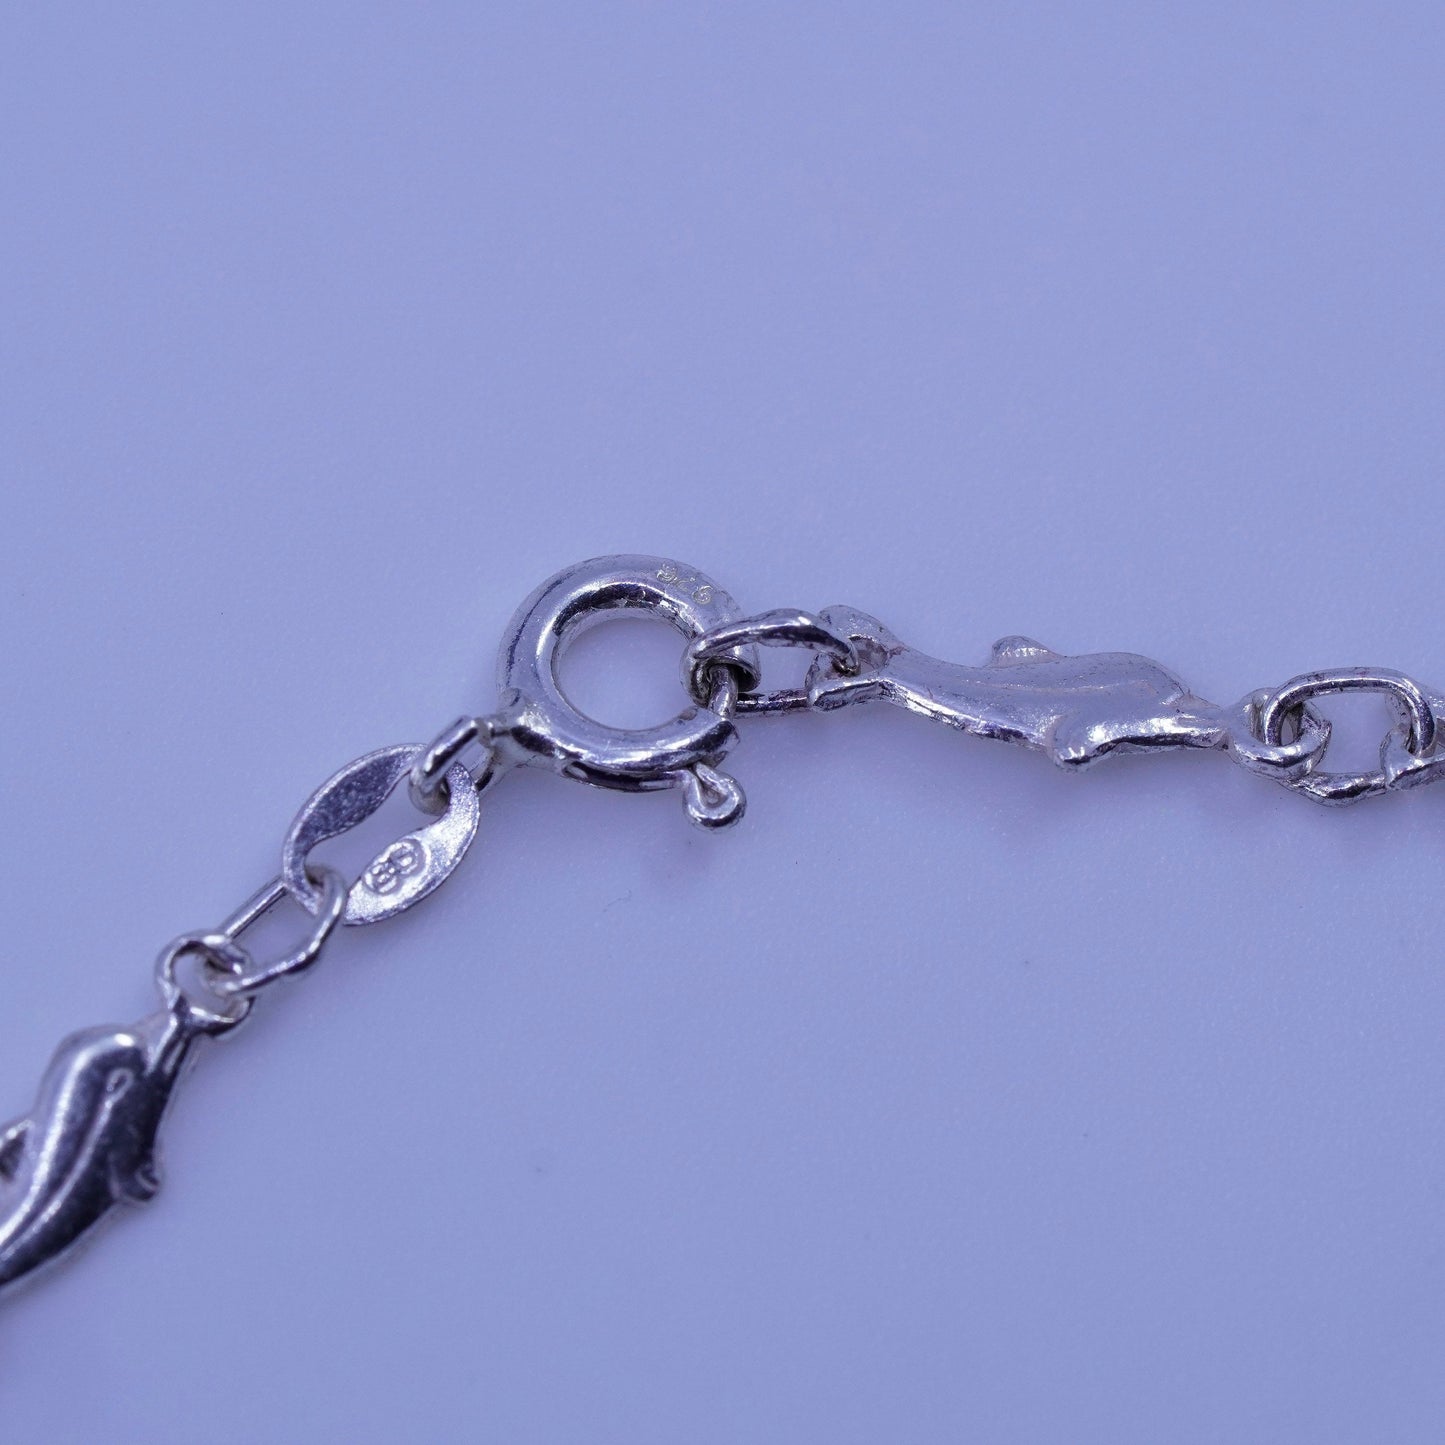 8.75”, Vintage Italy Sterling 925 silver handmade bracelet, dolphin link chain